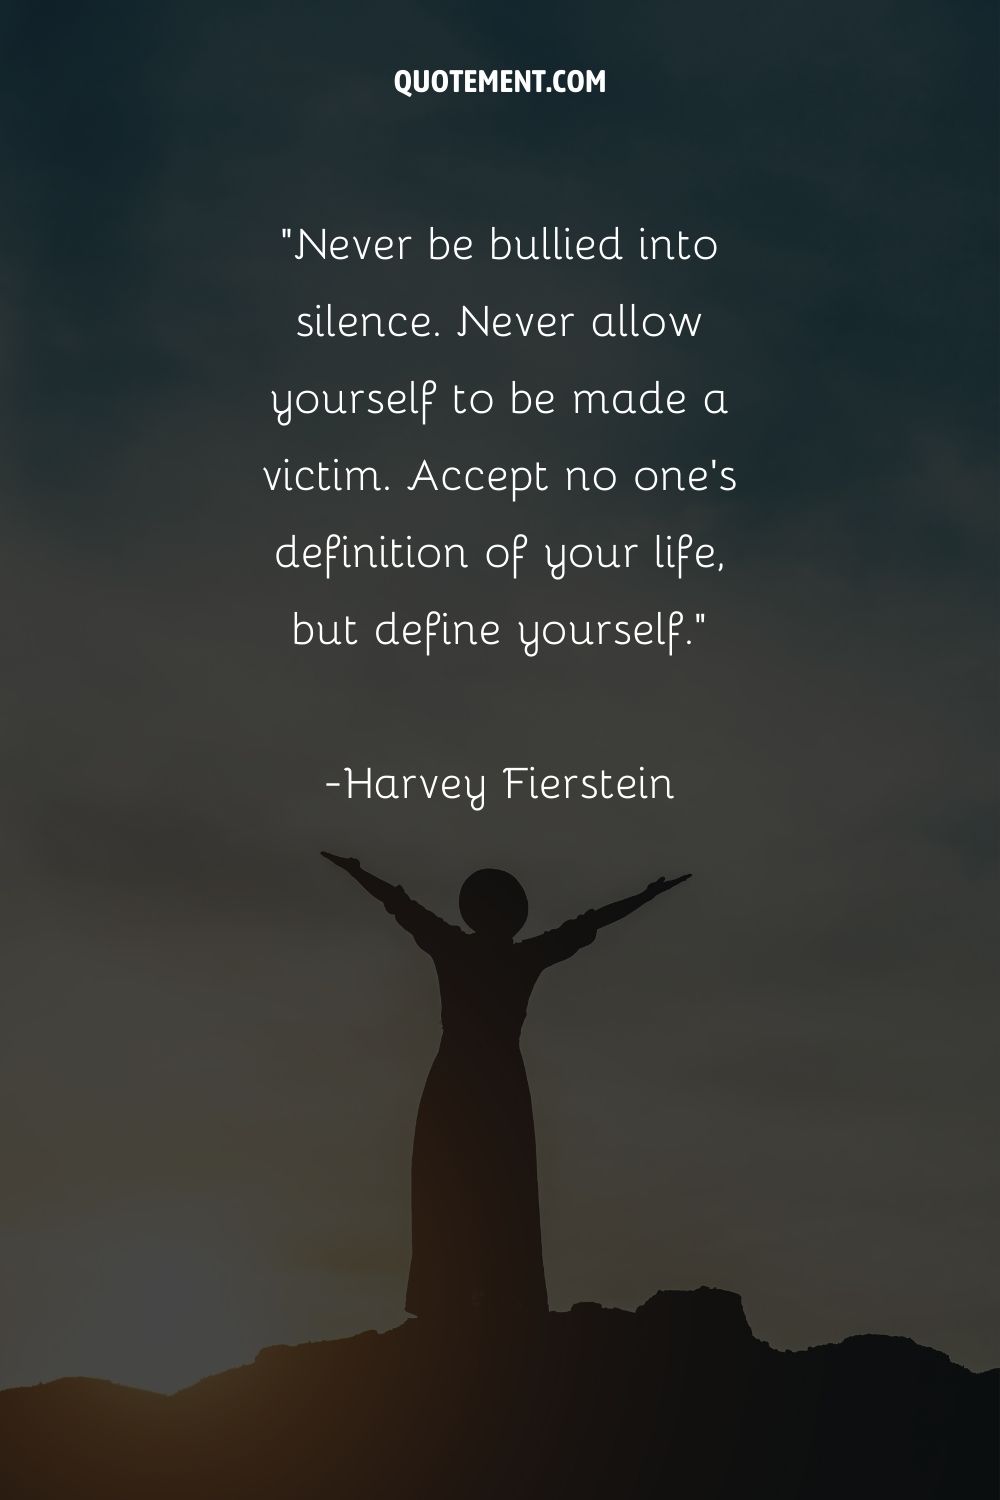 Never be bullied into silence. Never allow yourself to be made a victim. Accept no one's definition